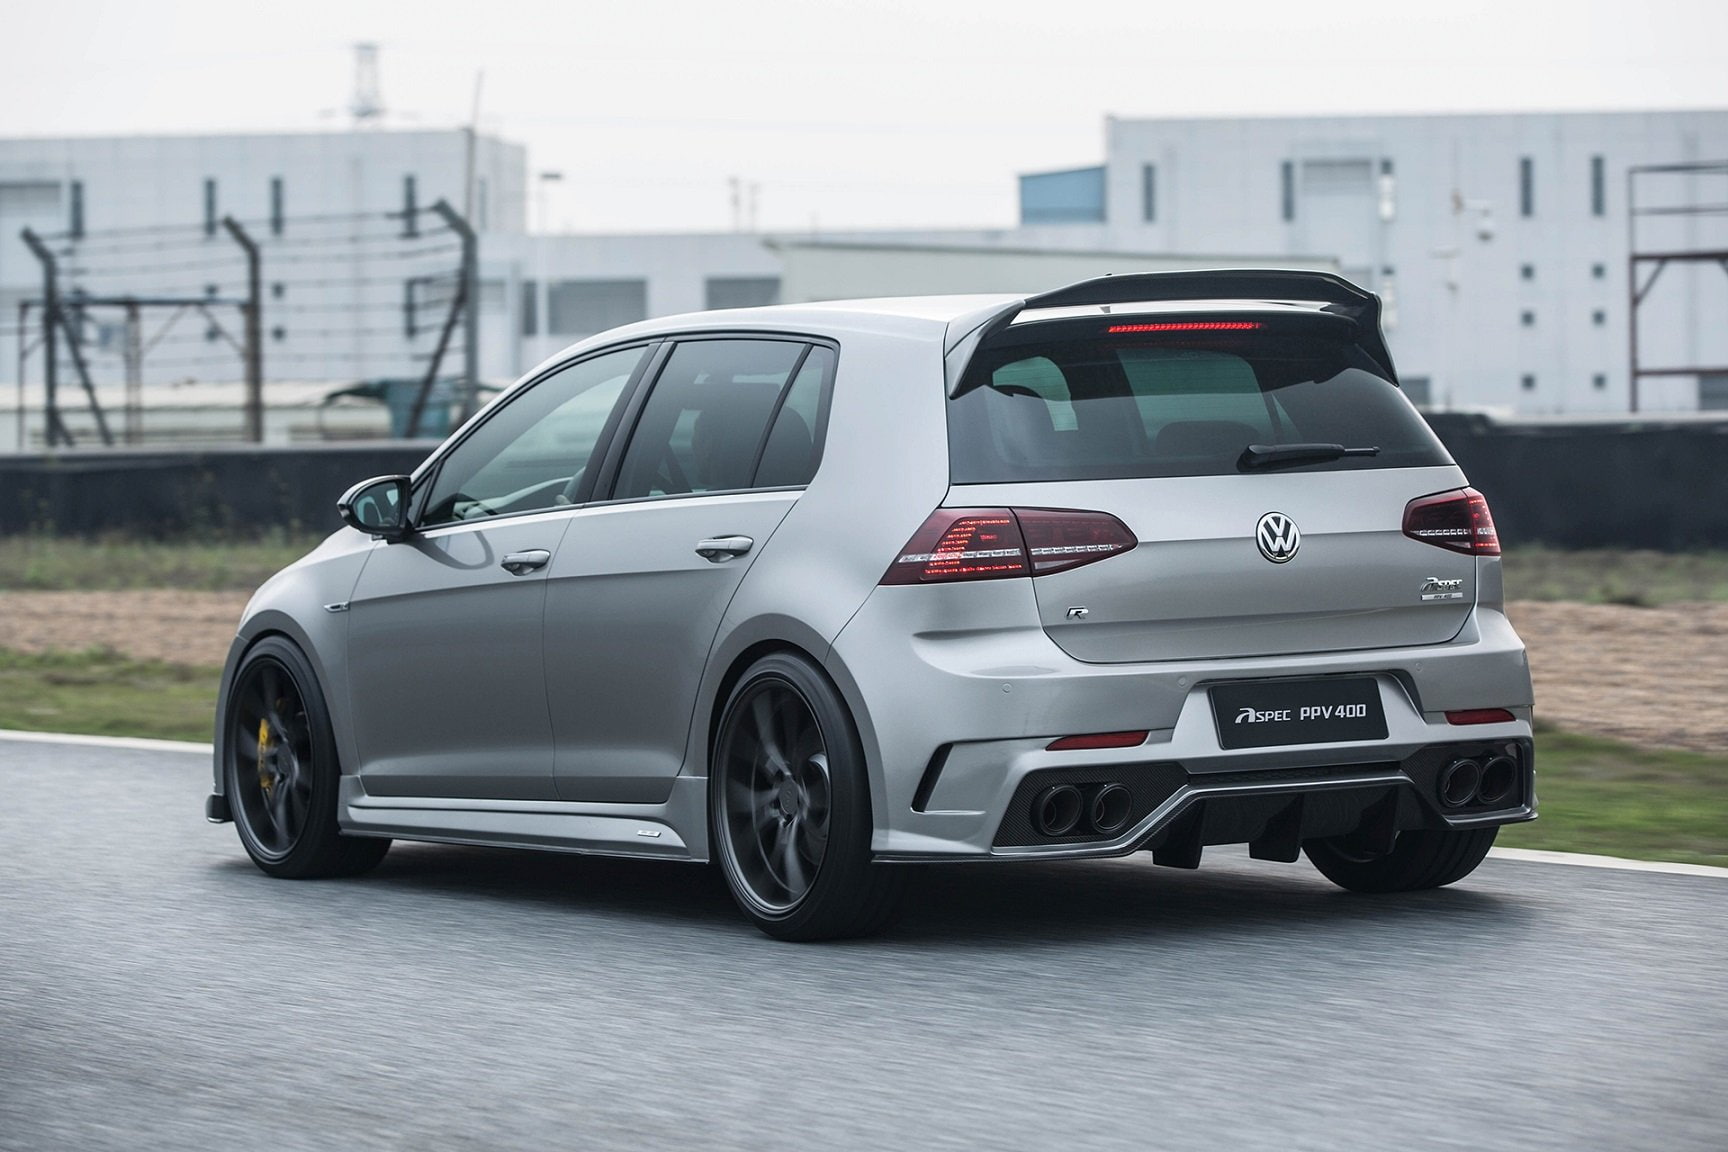 (typ, 2015, 5g), aspec, cars, golf, modified, ppv-400, volkswagen